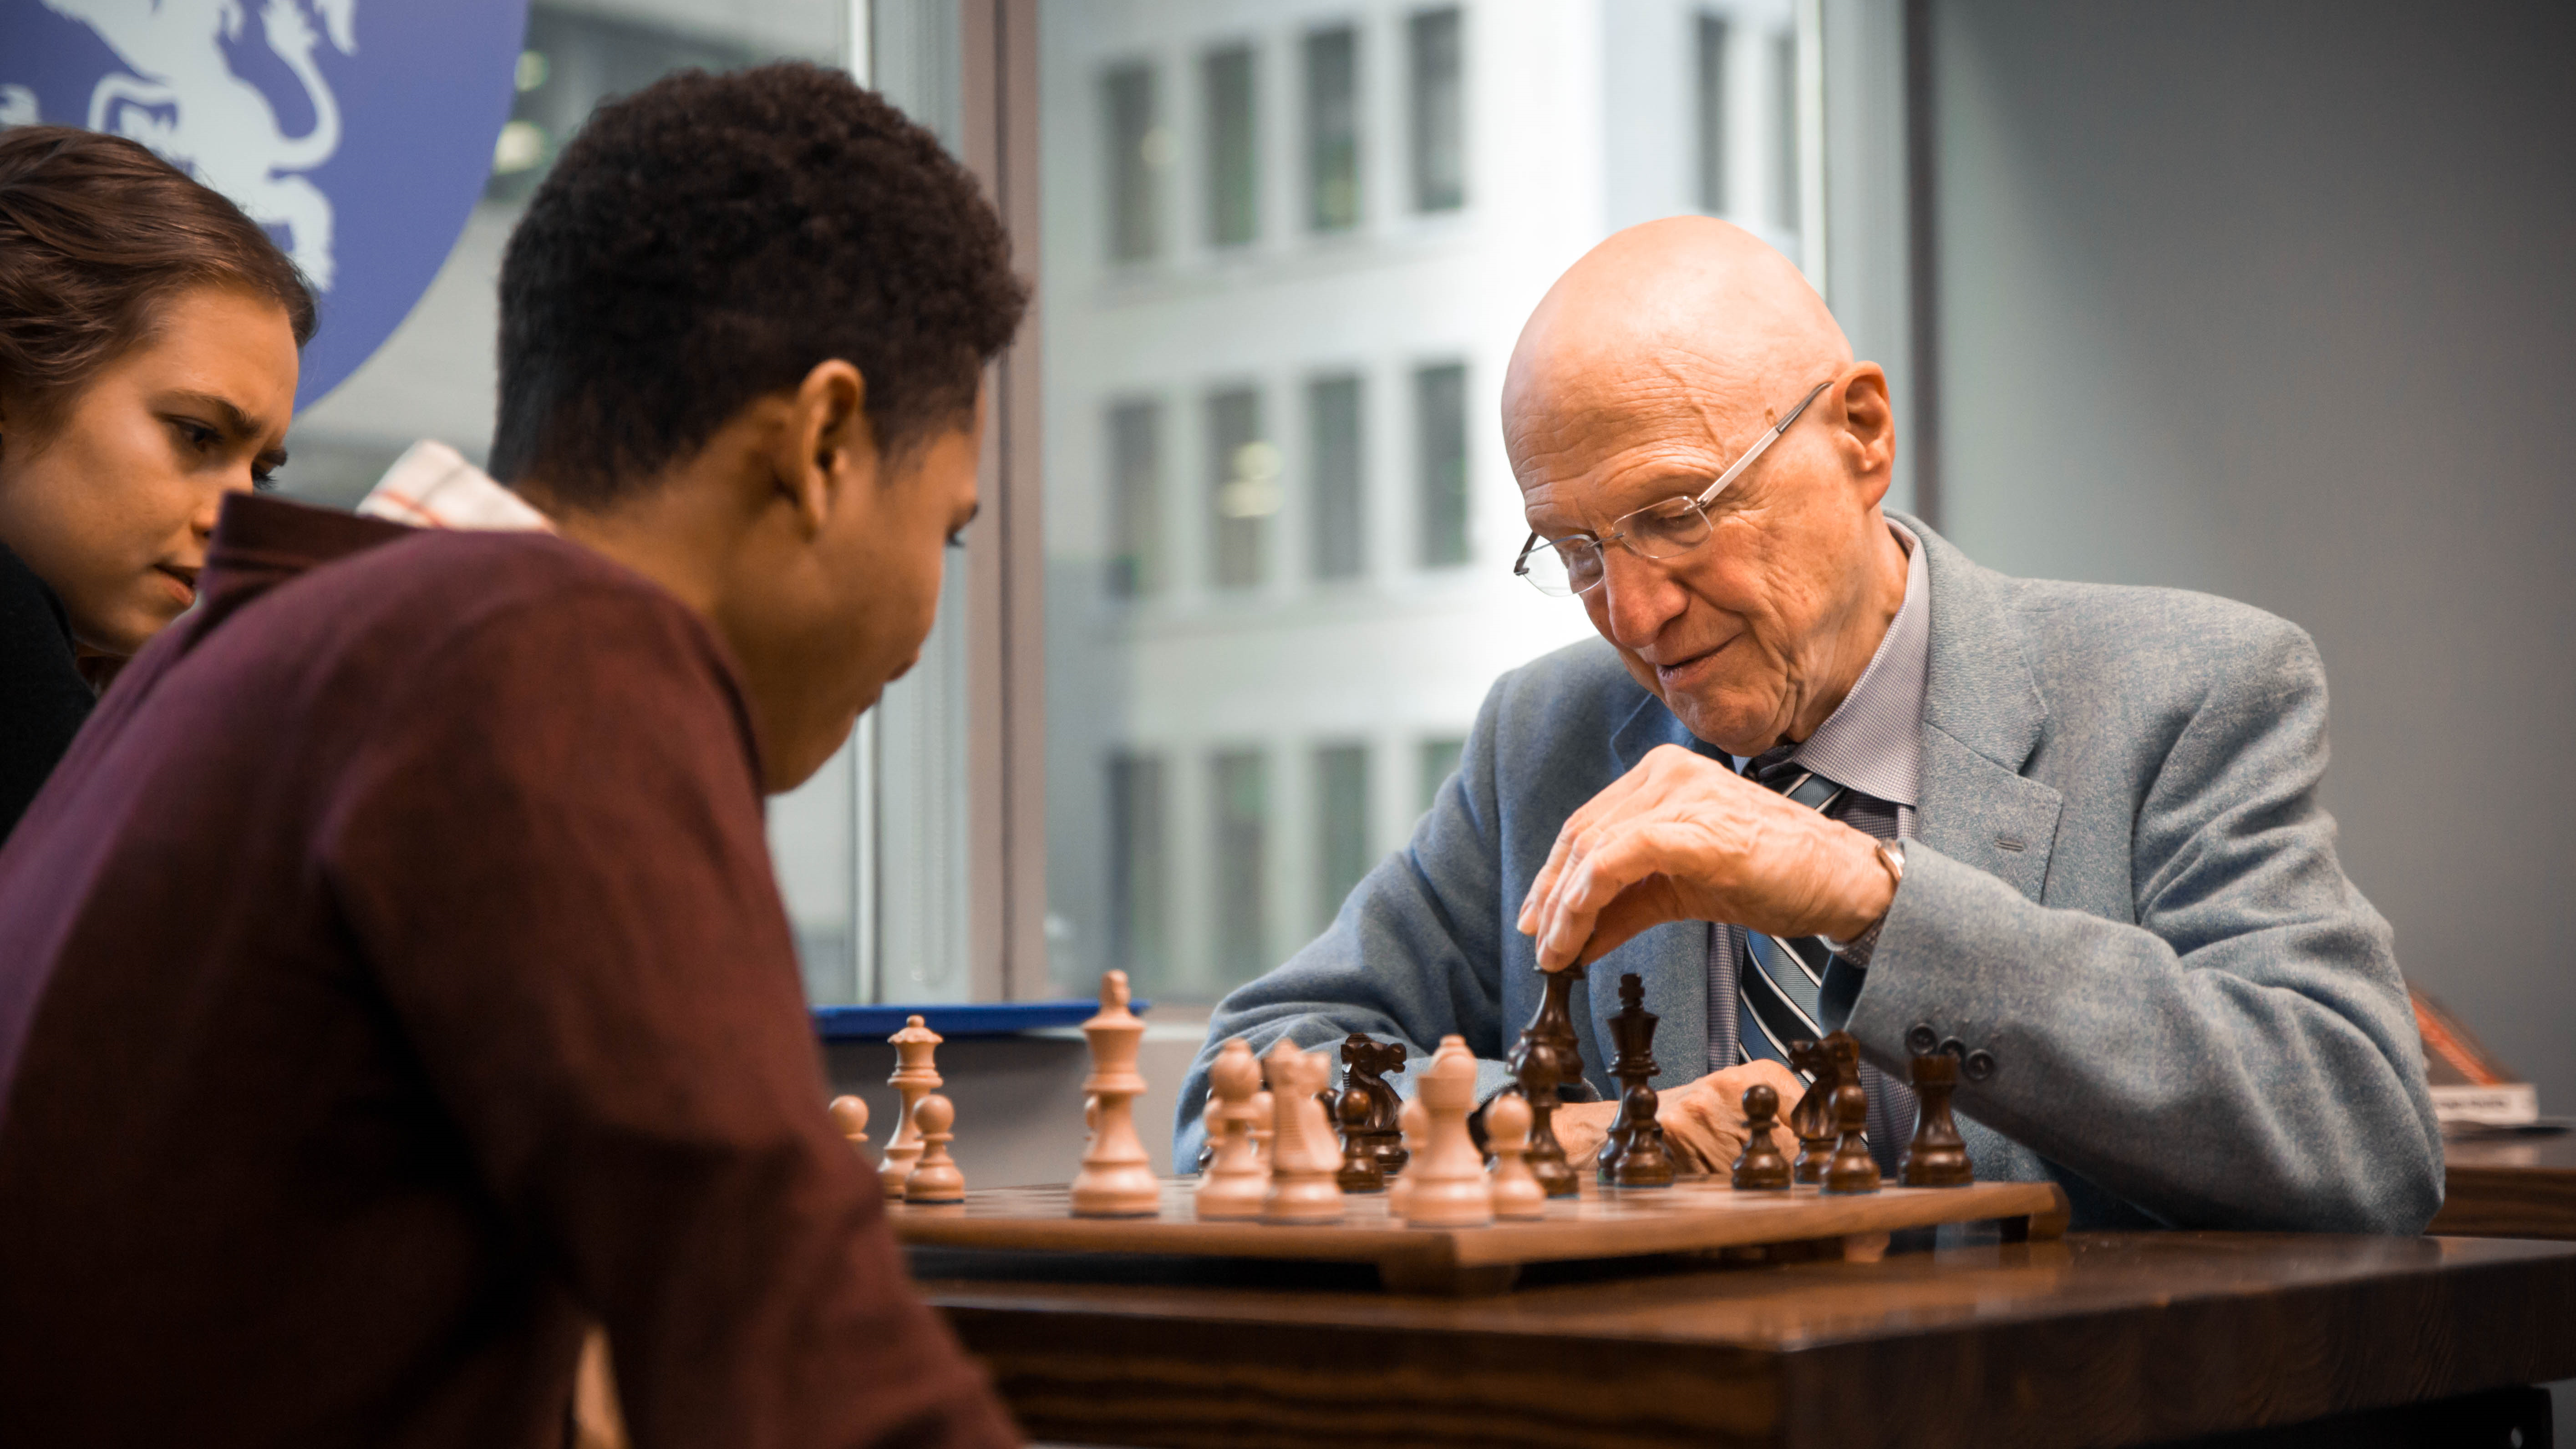 Dr. Kreeft playing chess with students